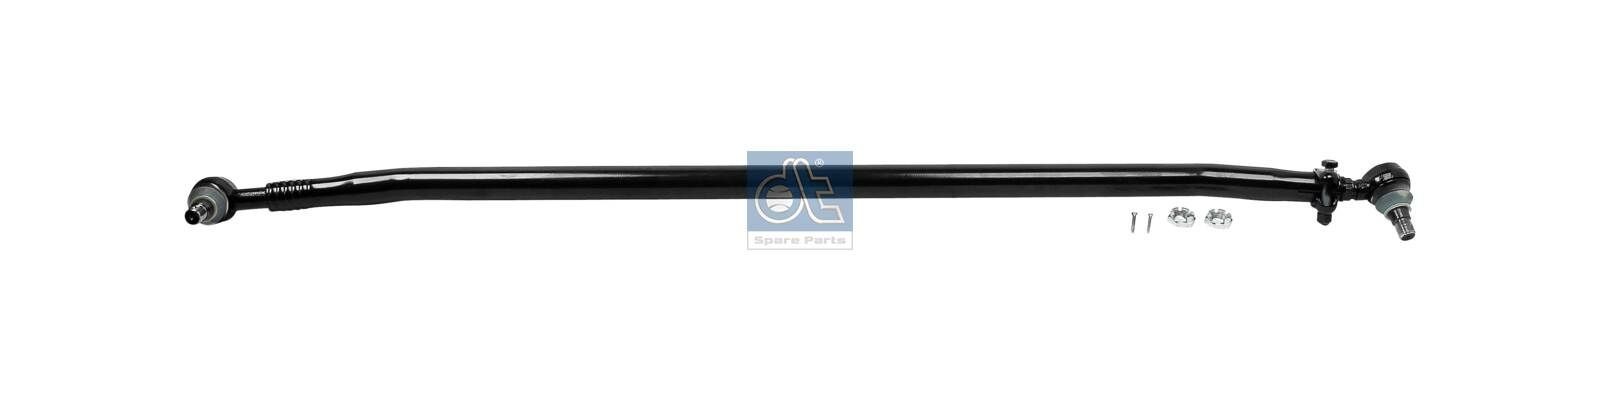 DT Spare Parts 5.22016 Rod Assembly 1 400 056